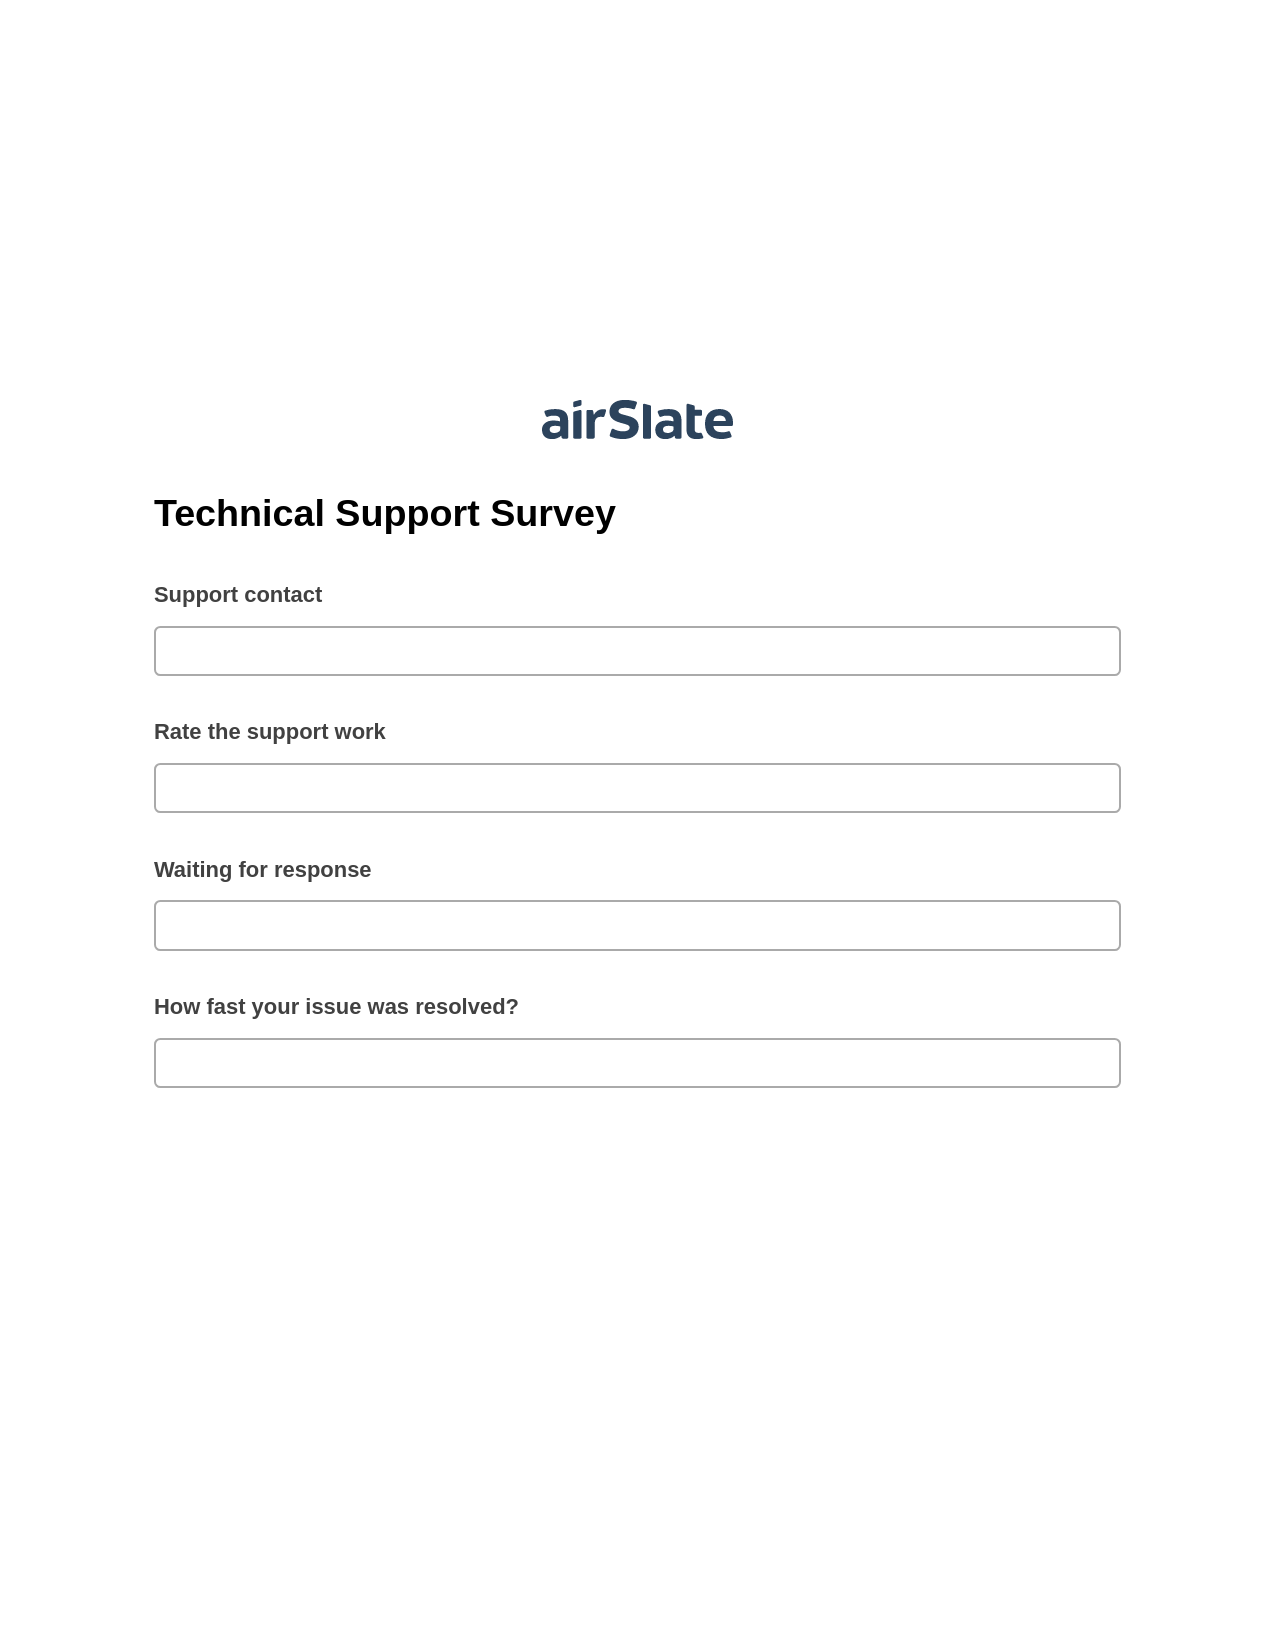 Technical Support Survey Pre-fill from another Slate Bot, Google Calendar Bot, Export to Excel 365 Bot